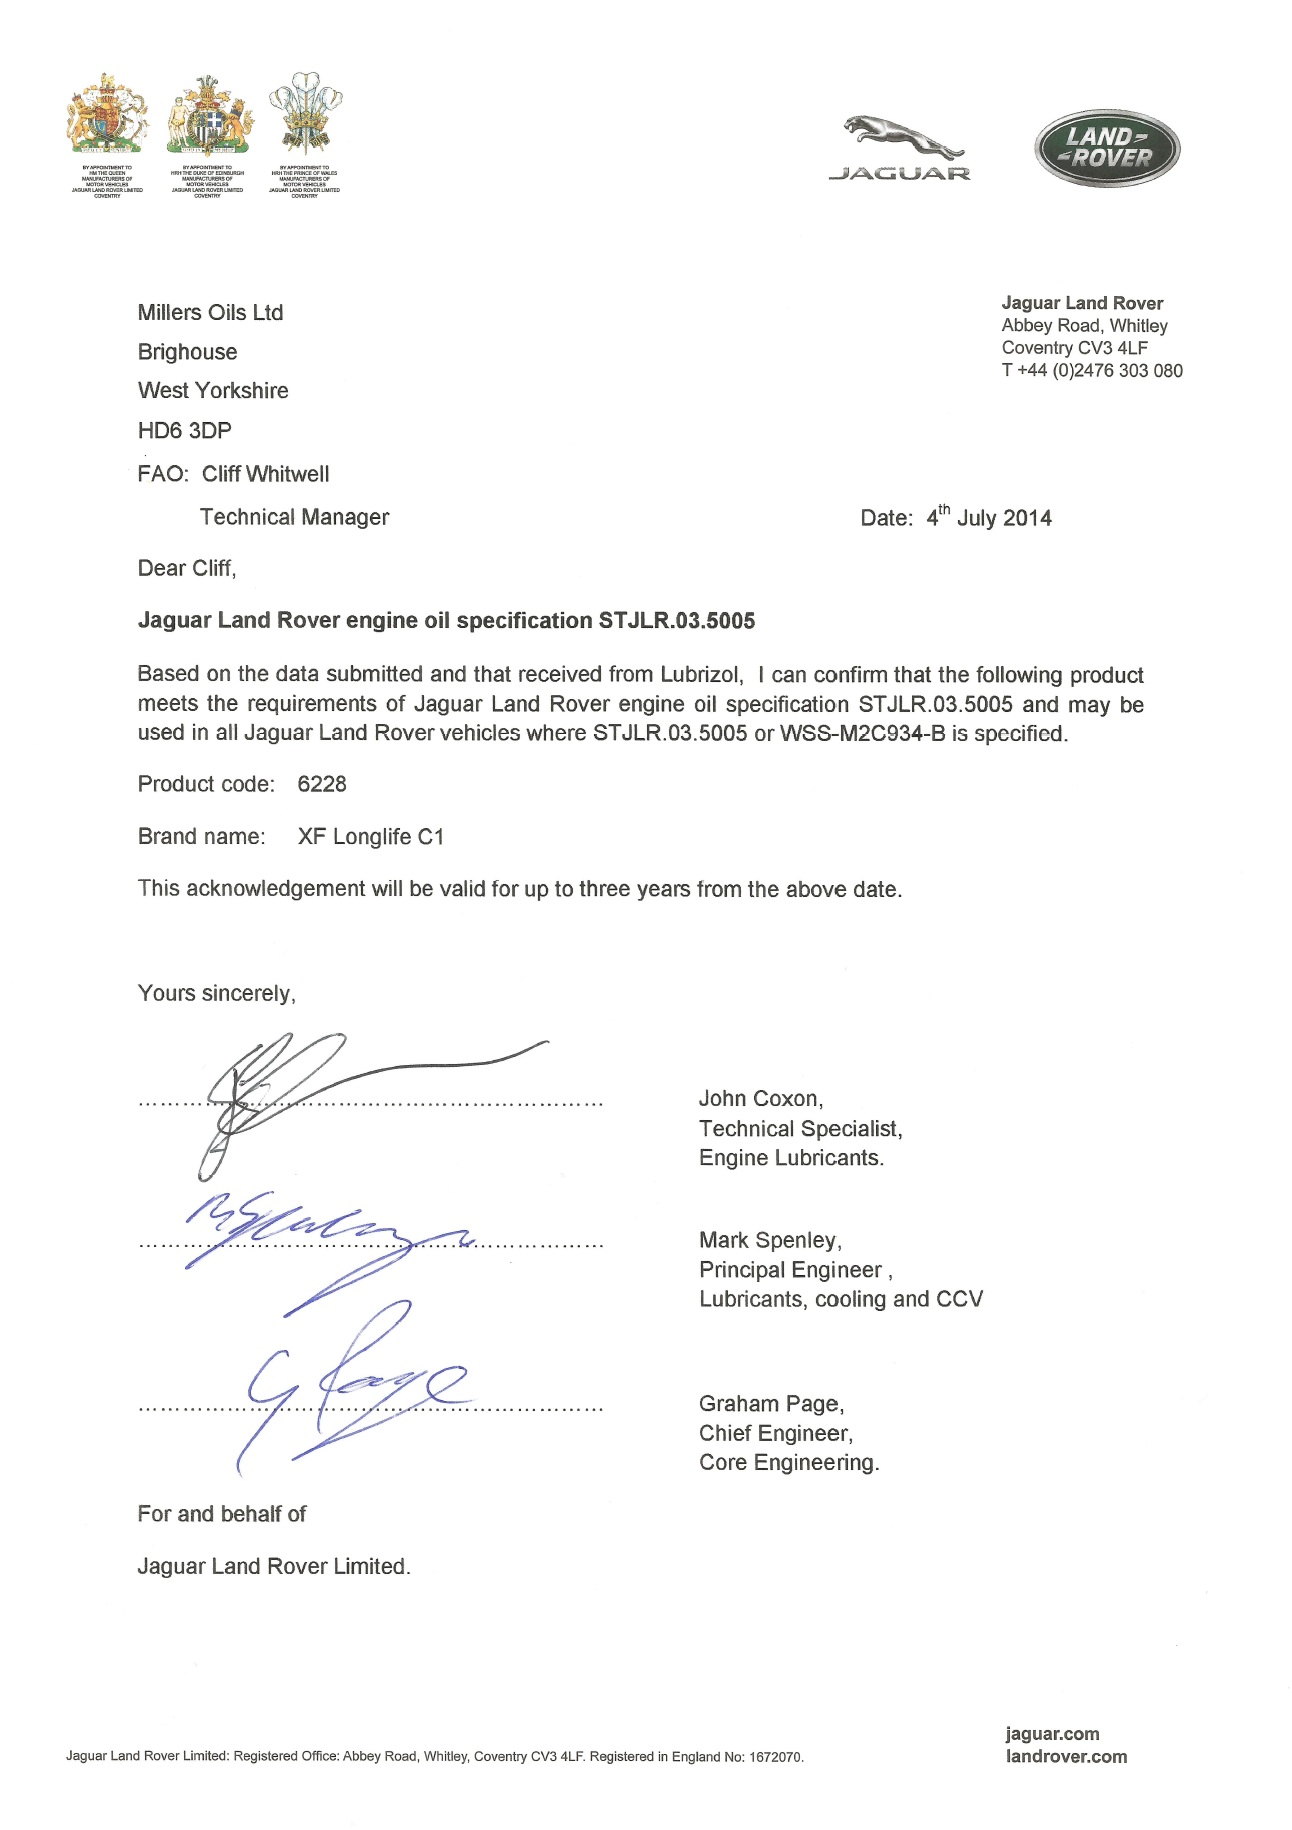 JaguarLandrover XF Longlife C1  (5W-30)  approval letter